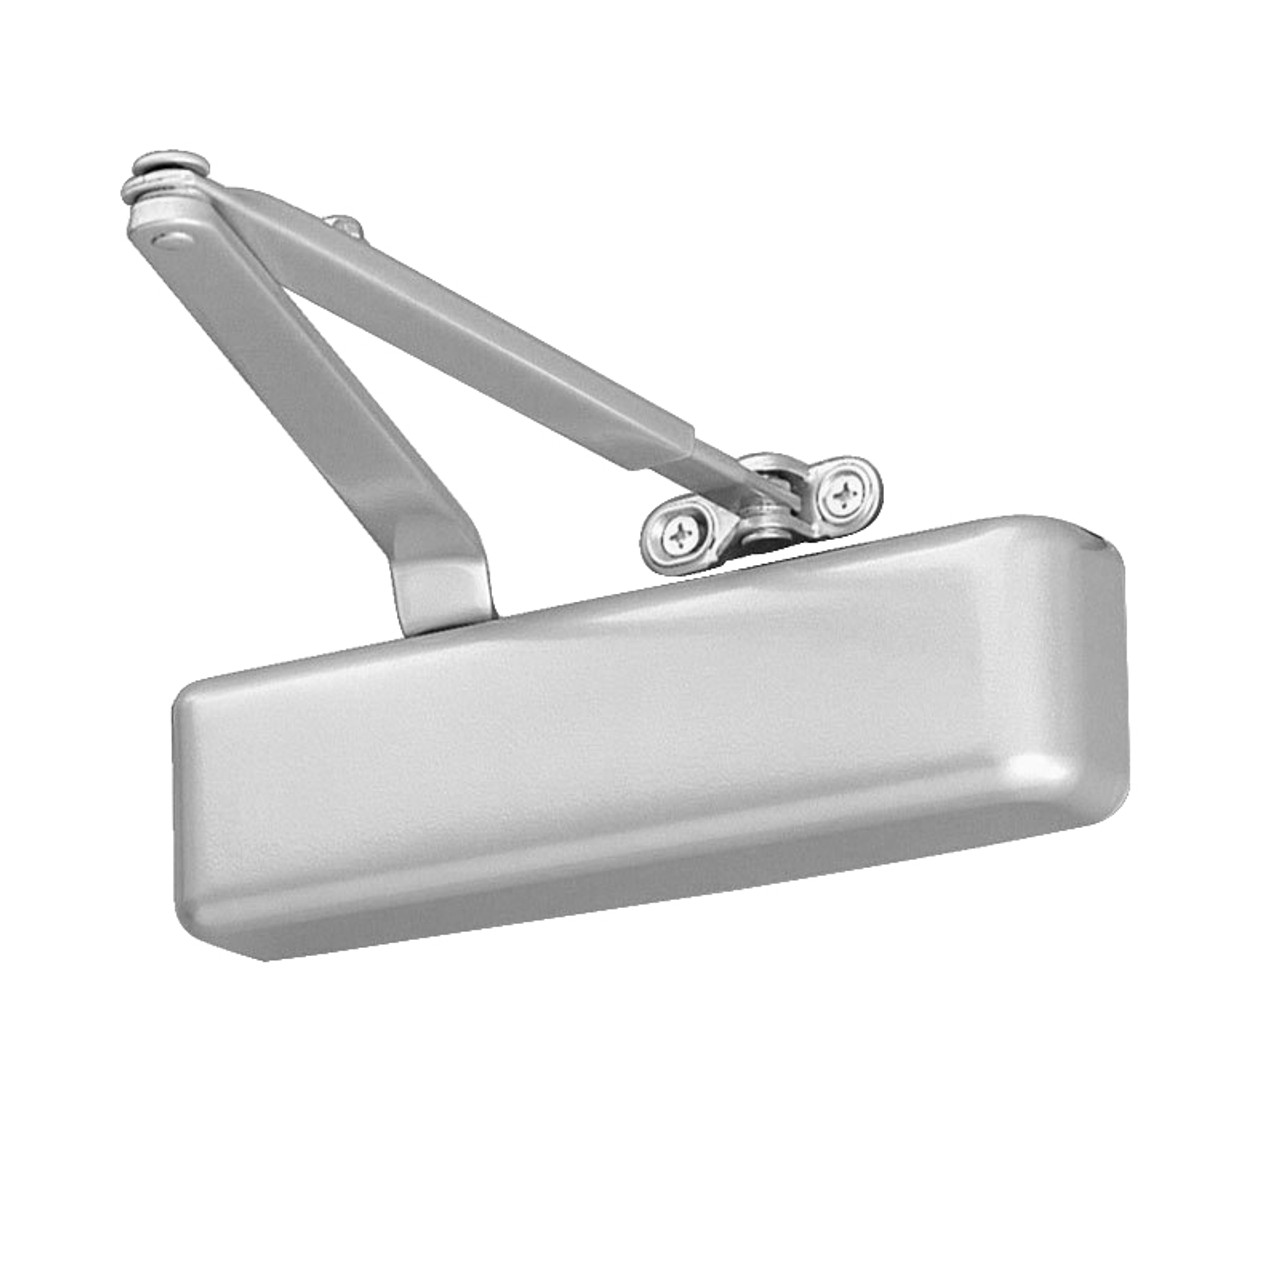 4031-Hw-PA-AL LCN Door Closer Hold Open Arm with Parallel Arm Shoe in Aluminum Finish